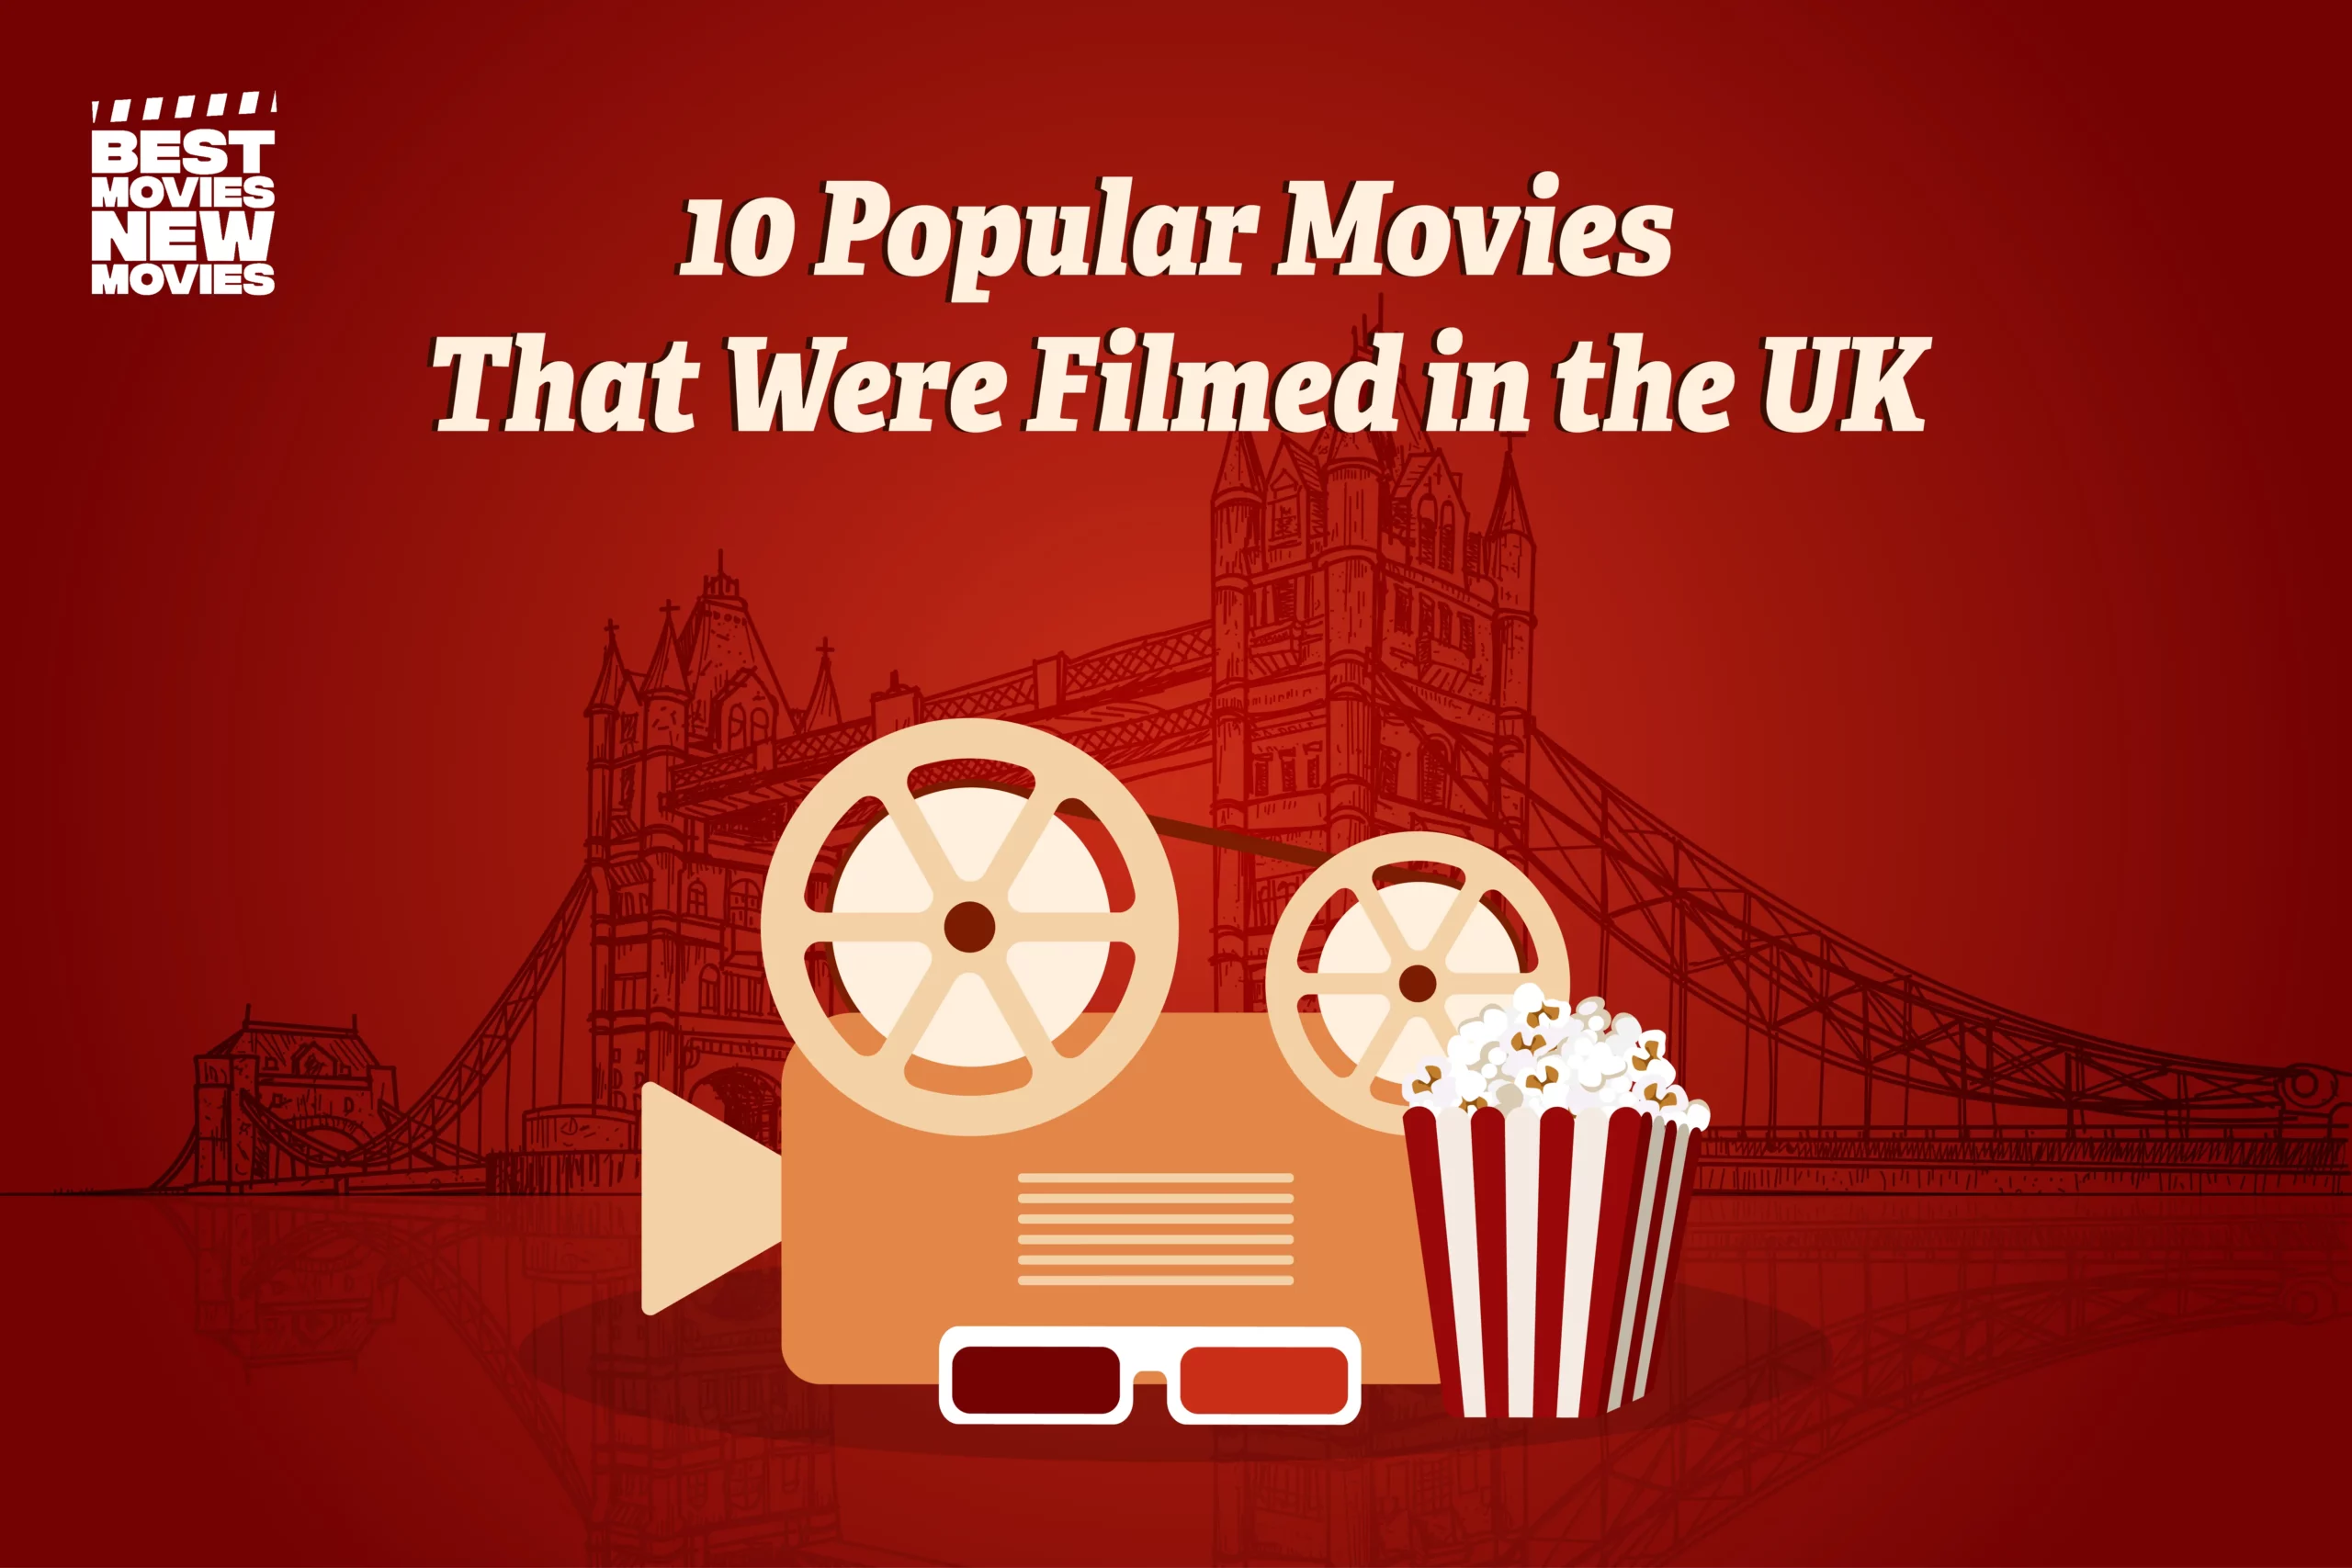 Movies Filmed in the UK